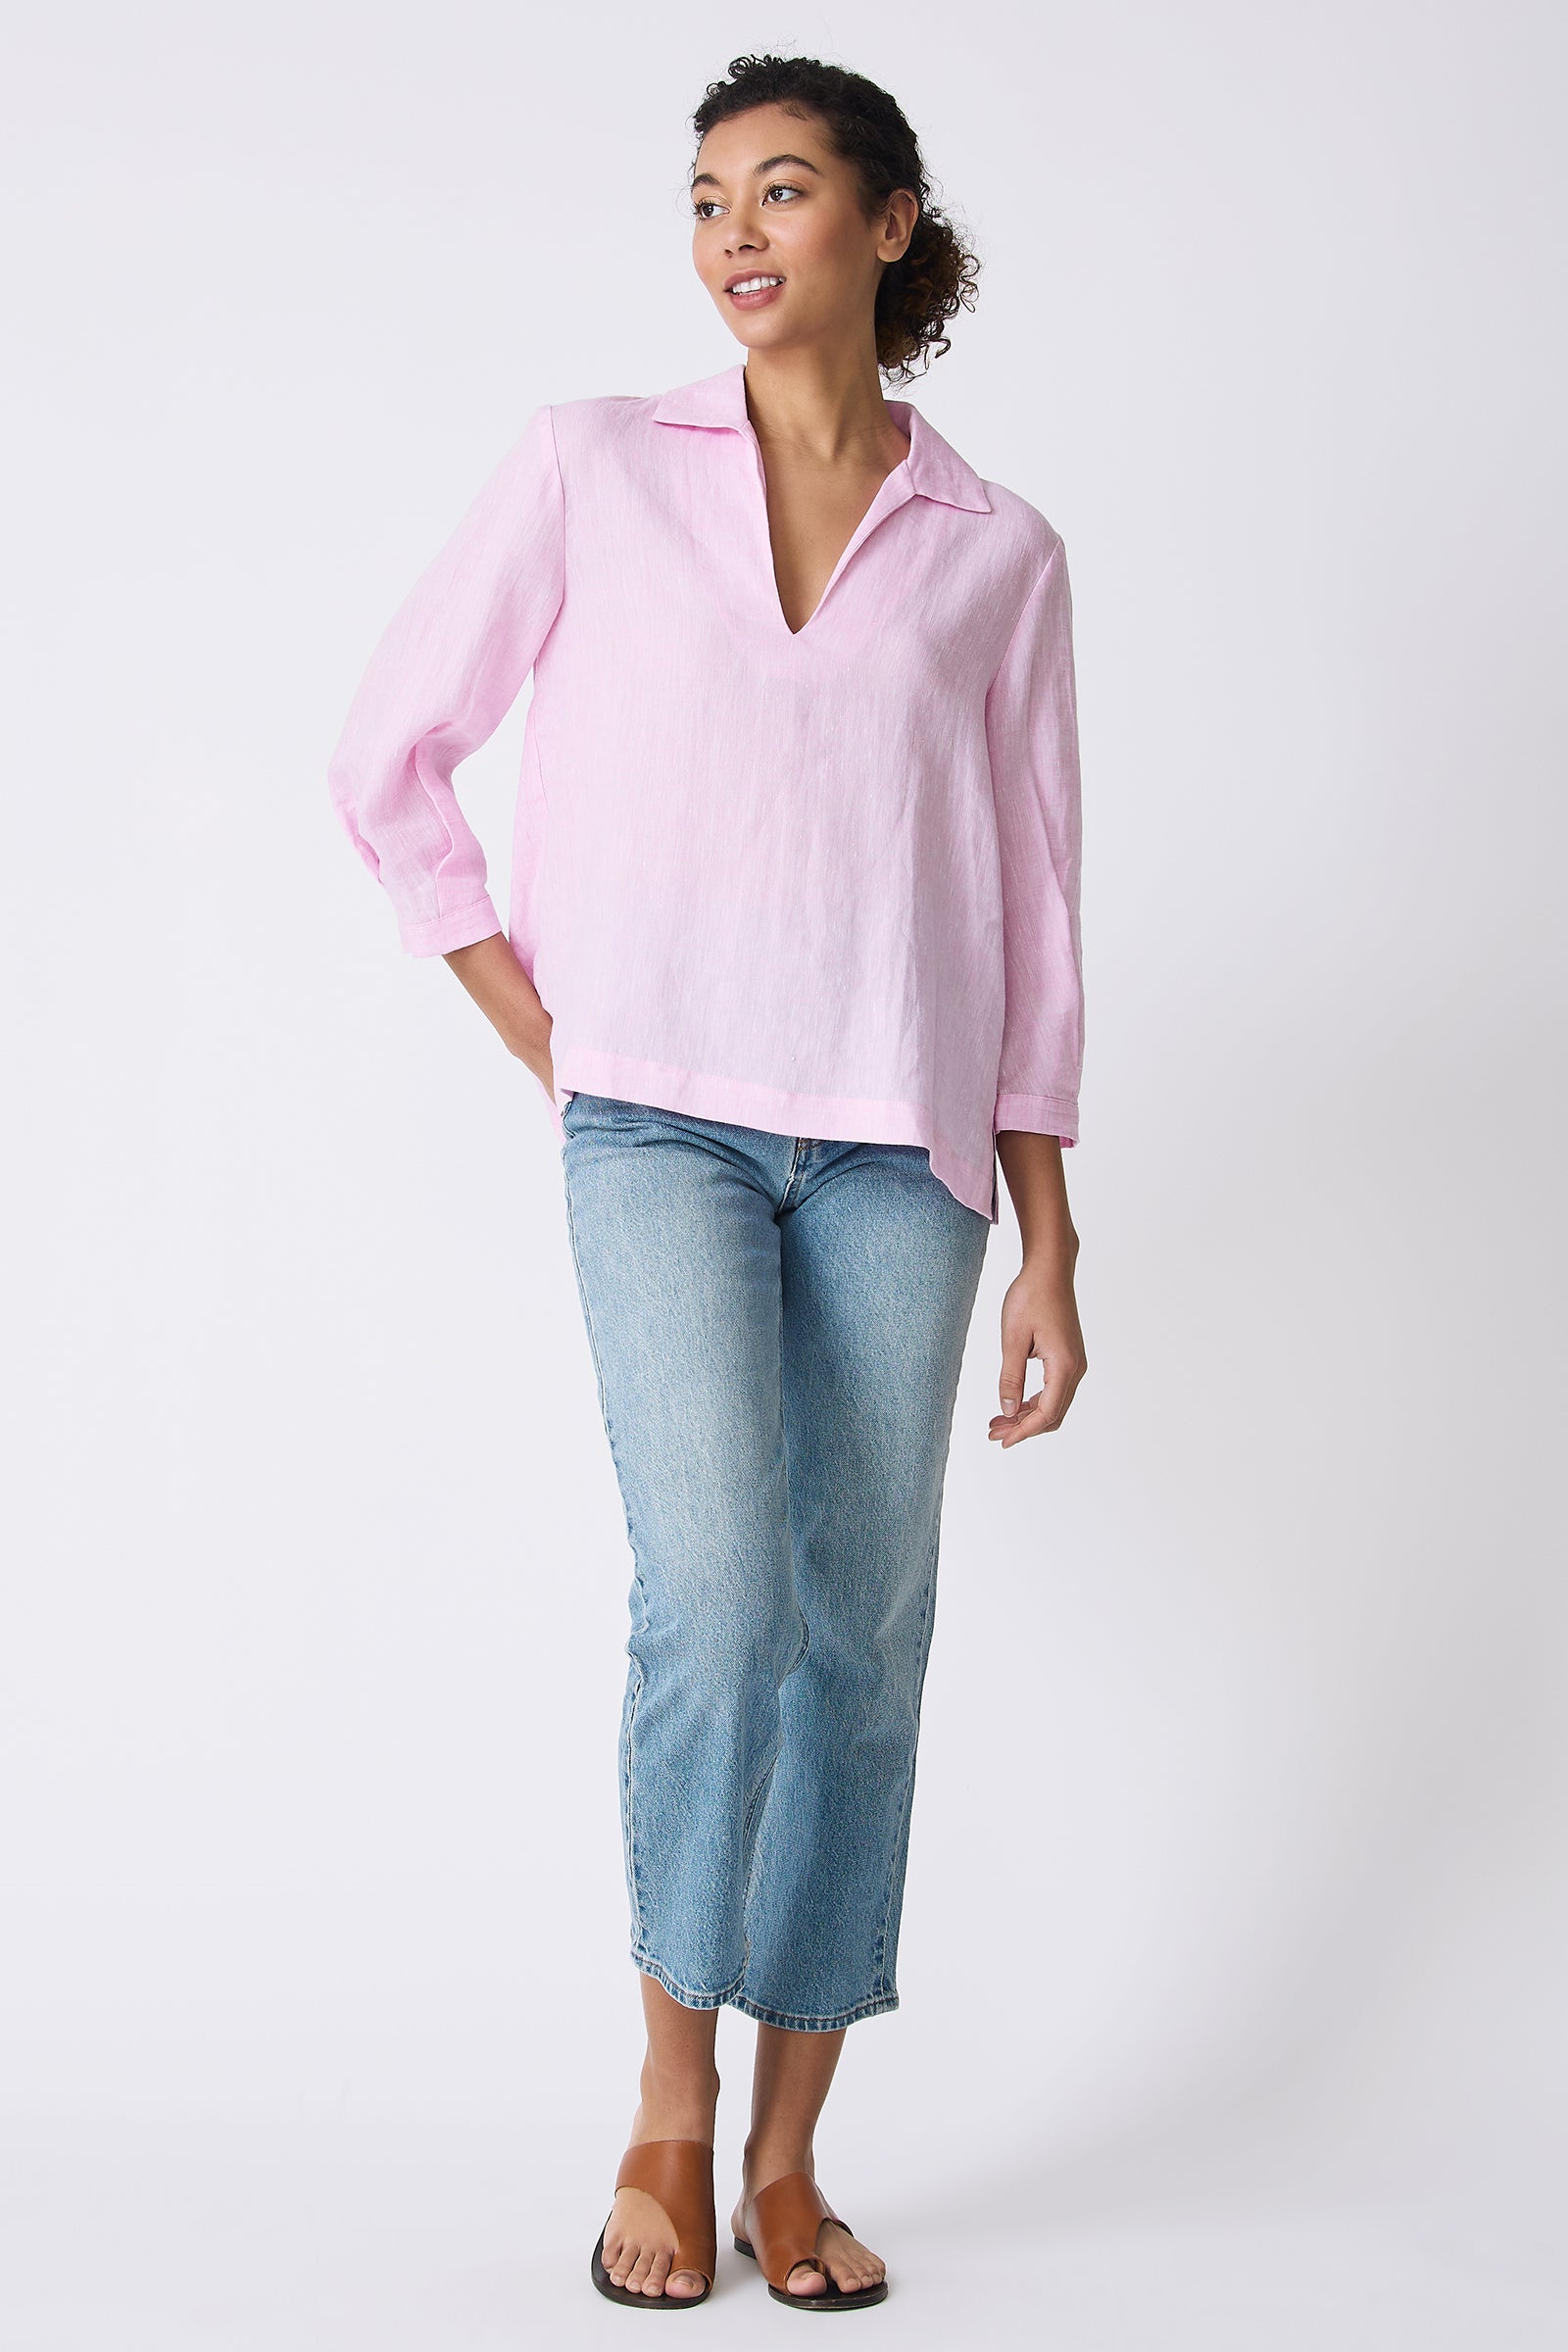 Kal Rieman Lea Collared V-Neck Top in Pink on model full front view